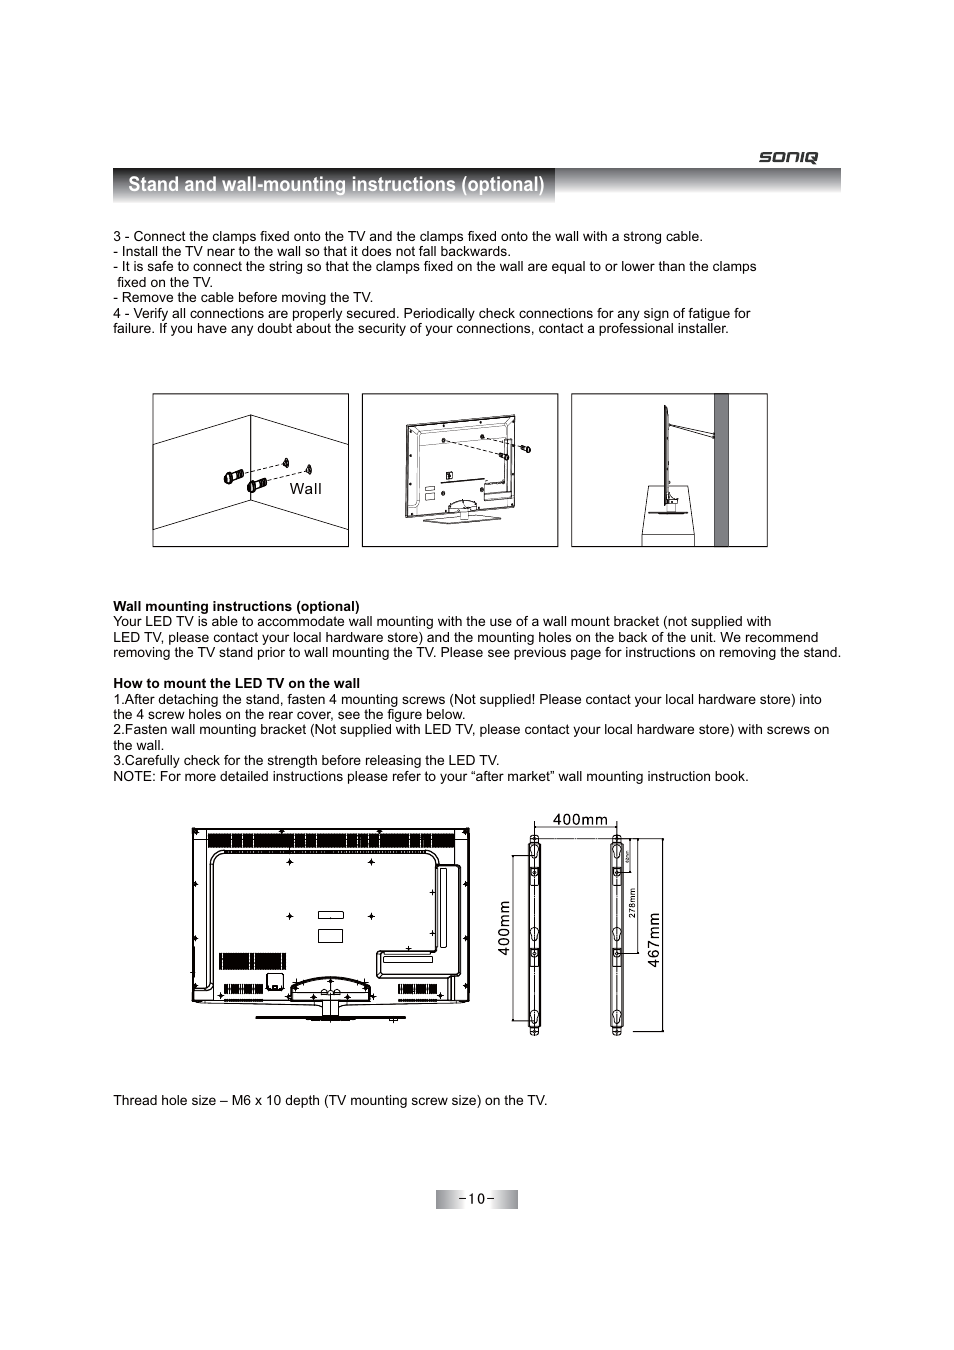 Stand and wall-mounting instructions (optional) | SONIQ ...